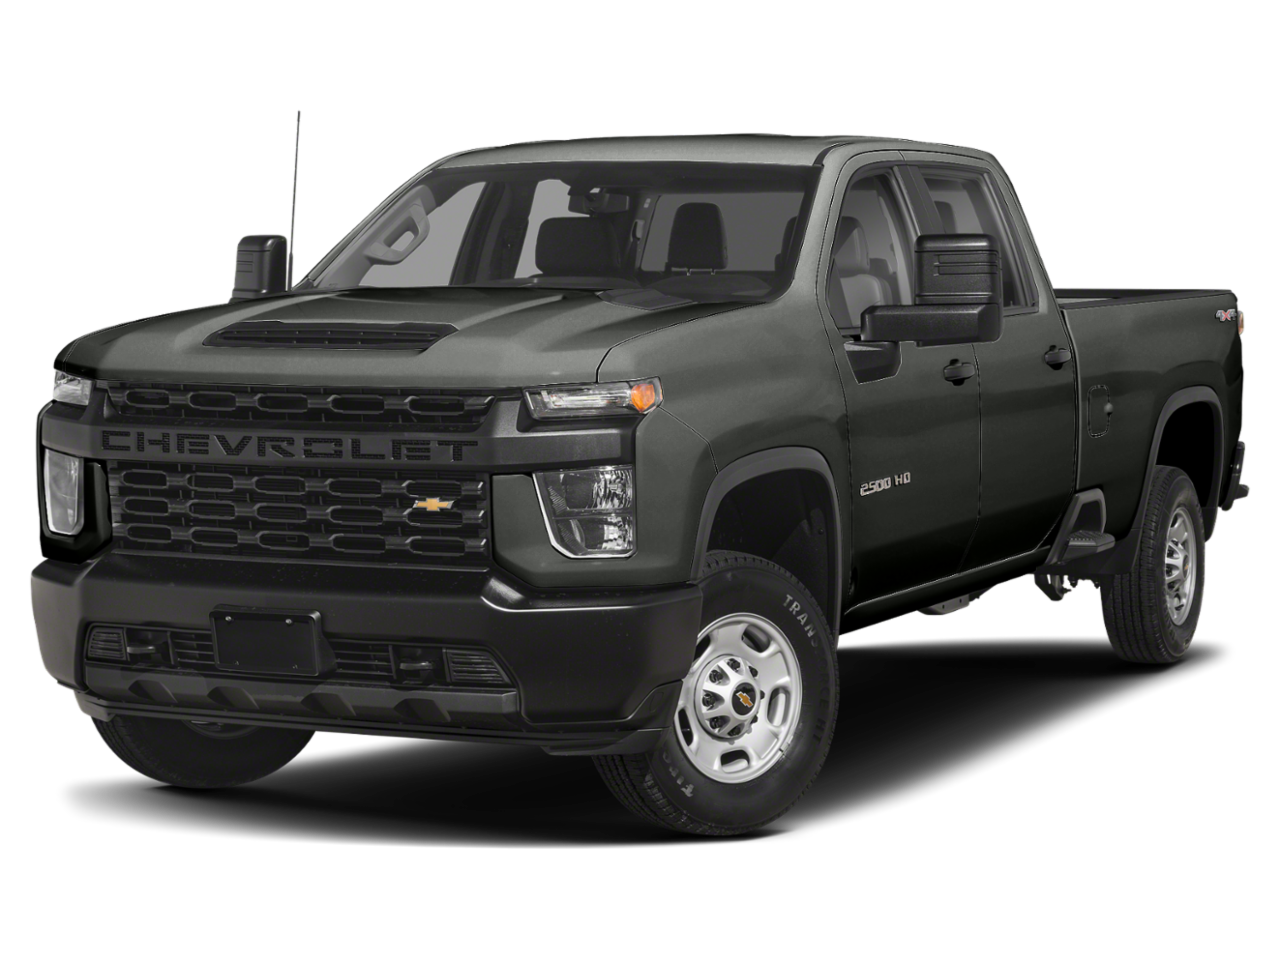 New Chevrolet silverado2500hd from your Muncie, IN dealership, All